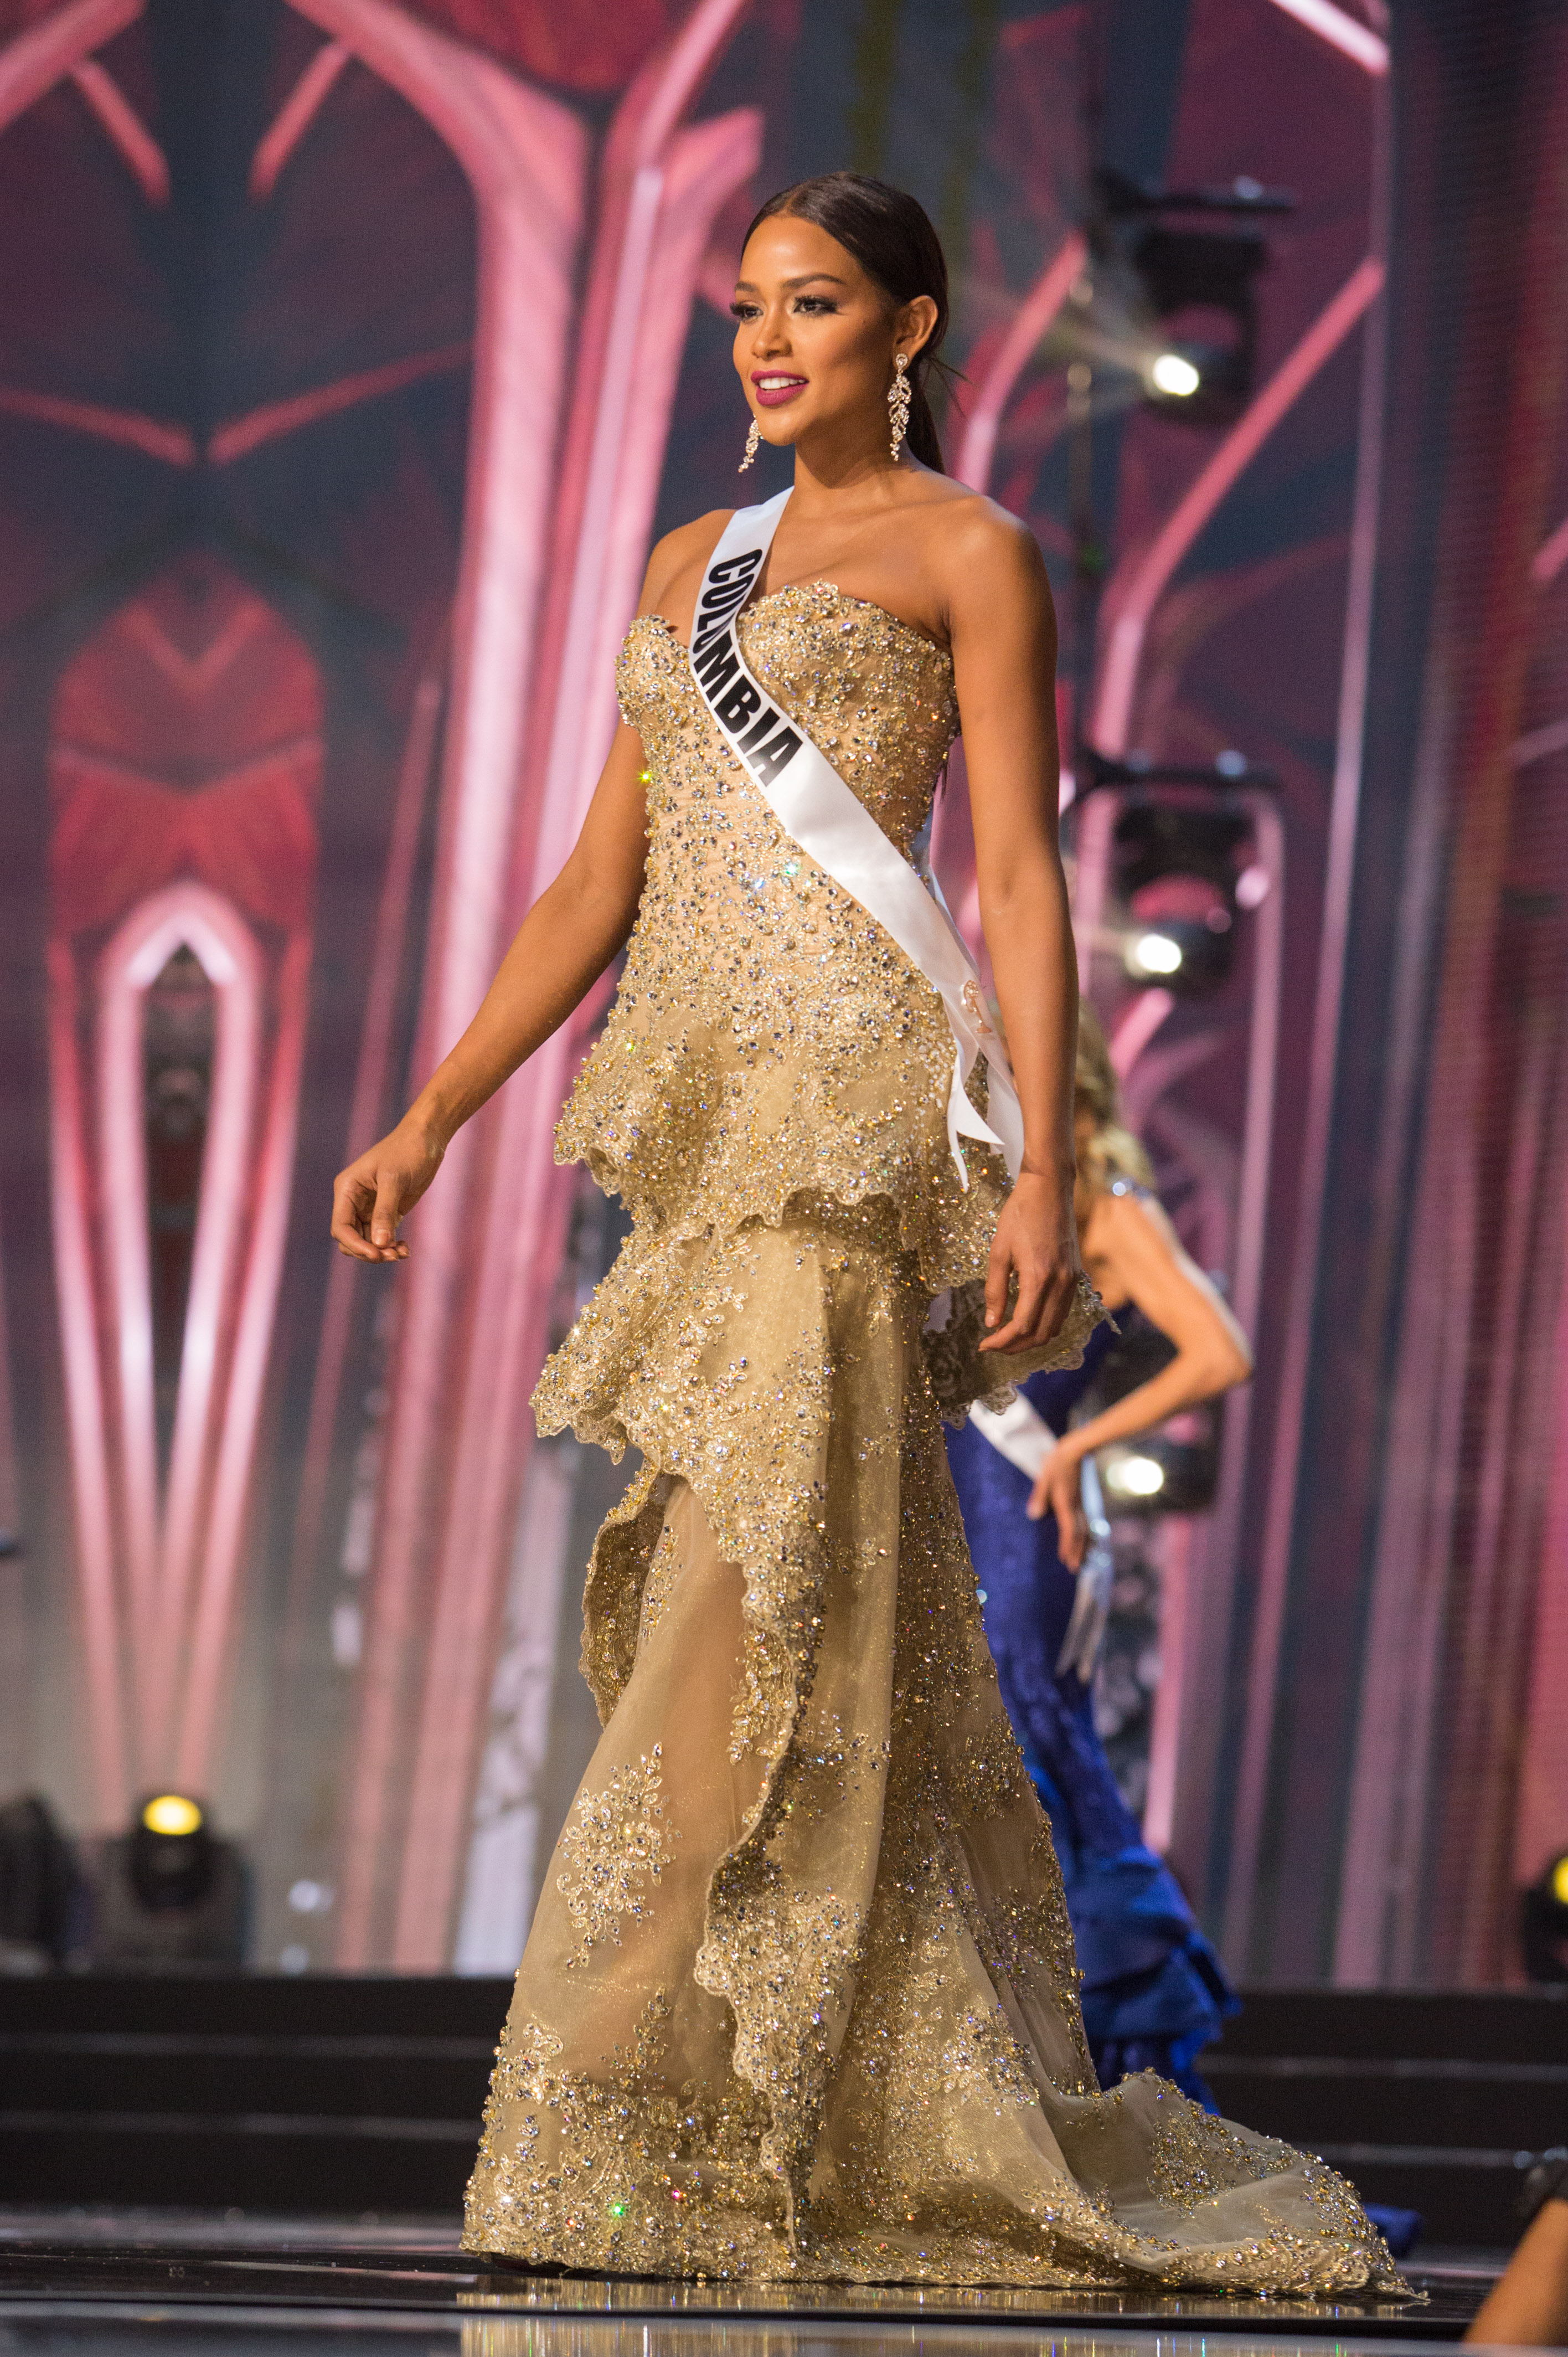 Andrea Tovar, Miss Colombia 2016 